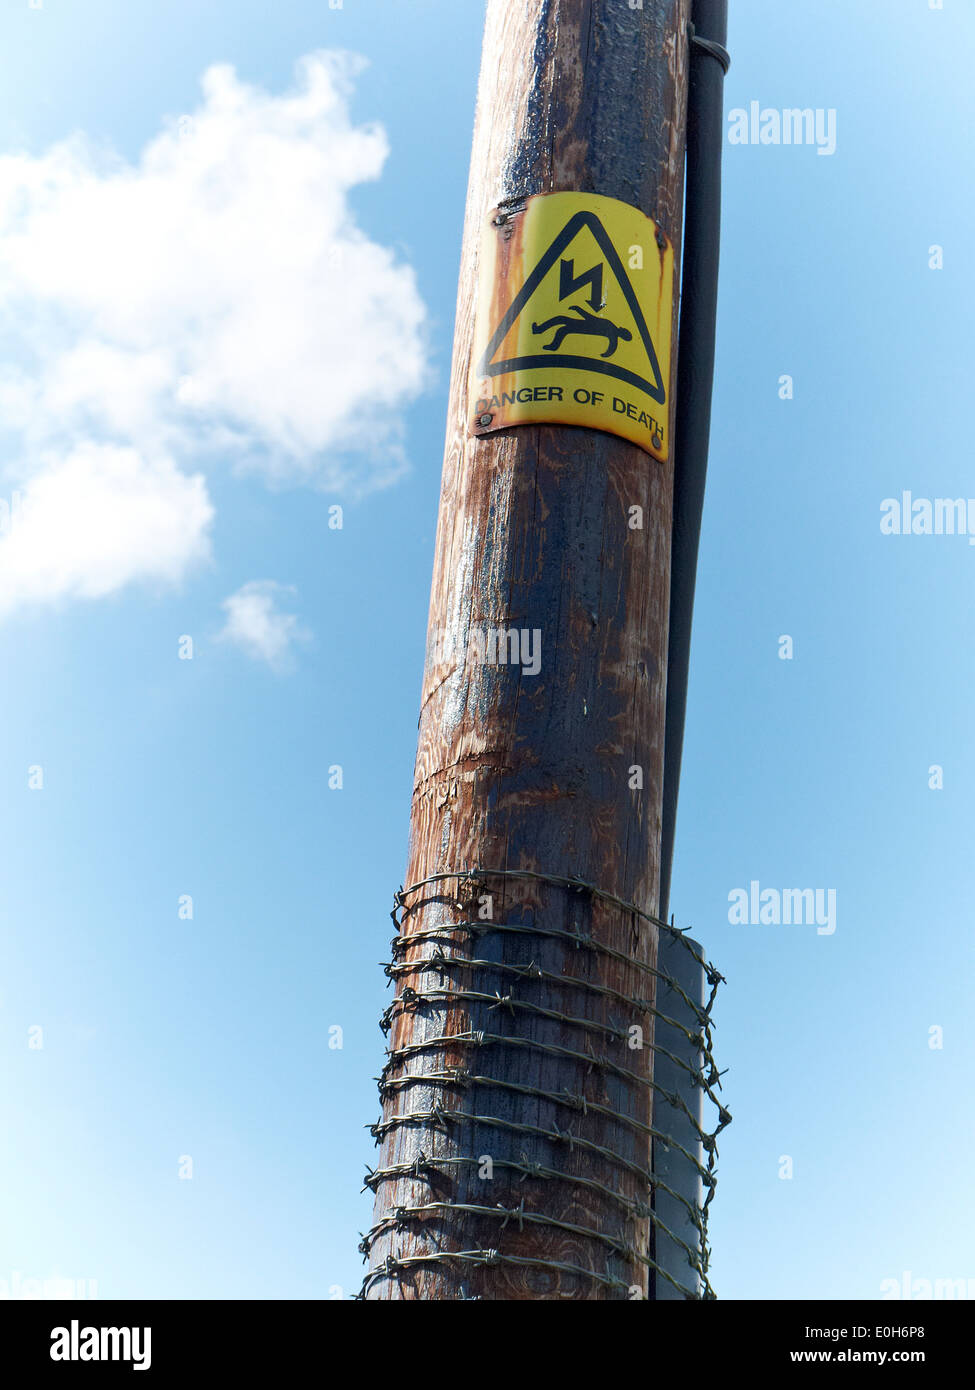 Danger of death sign on electricity pole UK Stock Photo